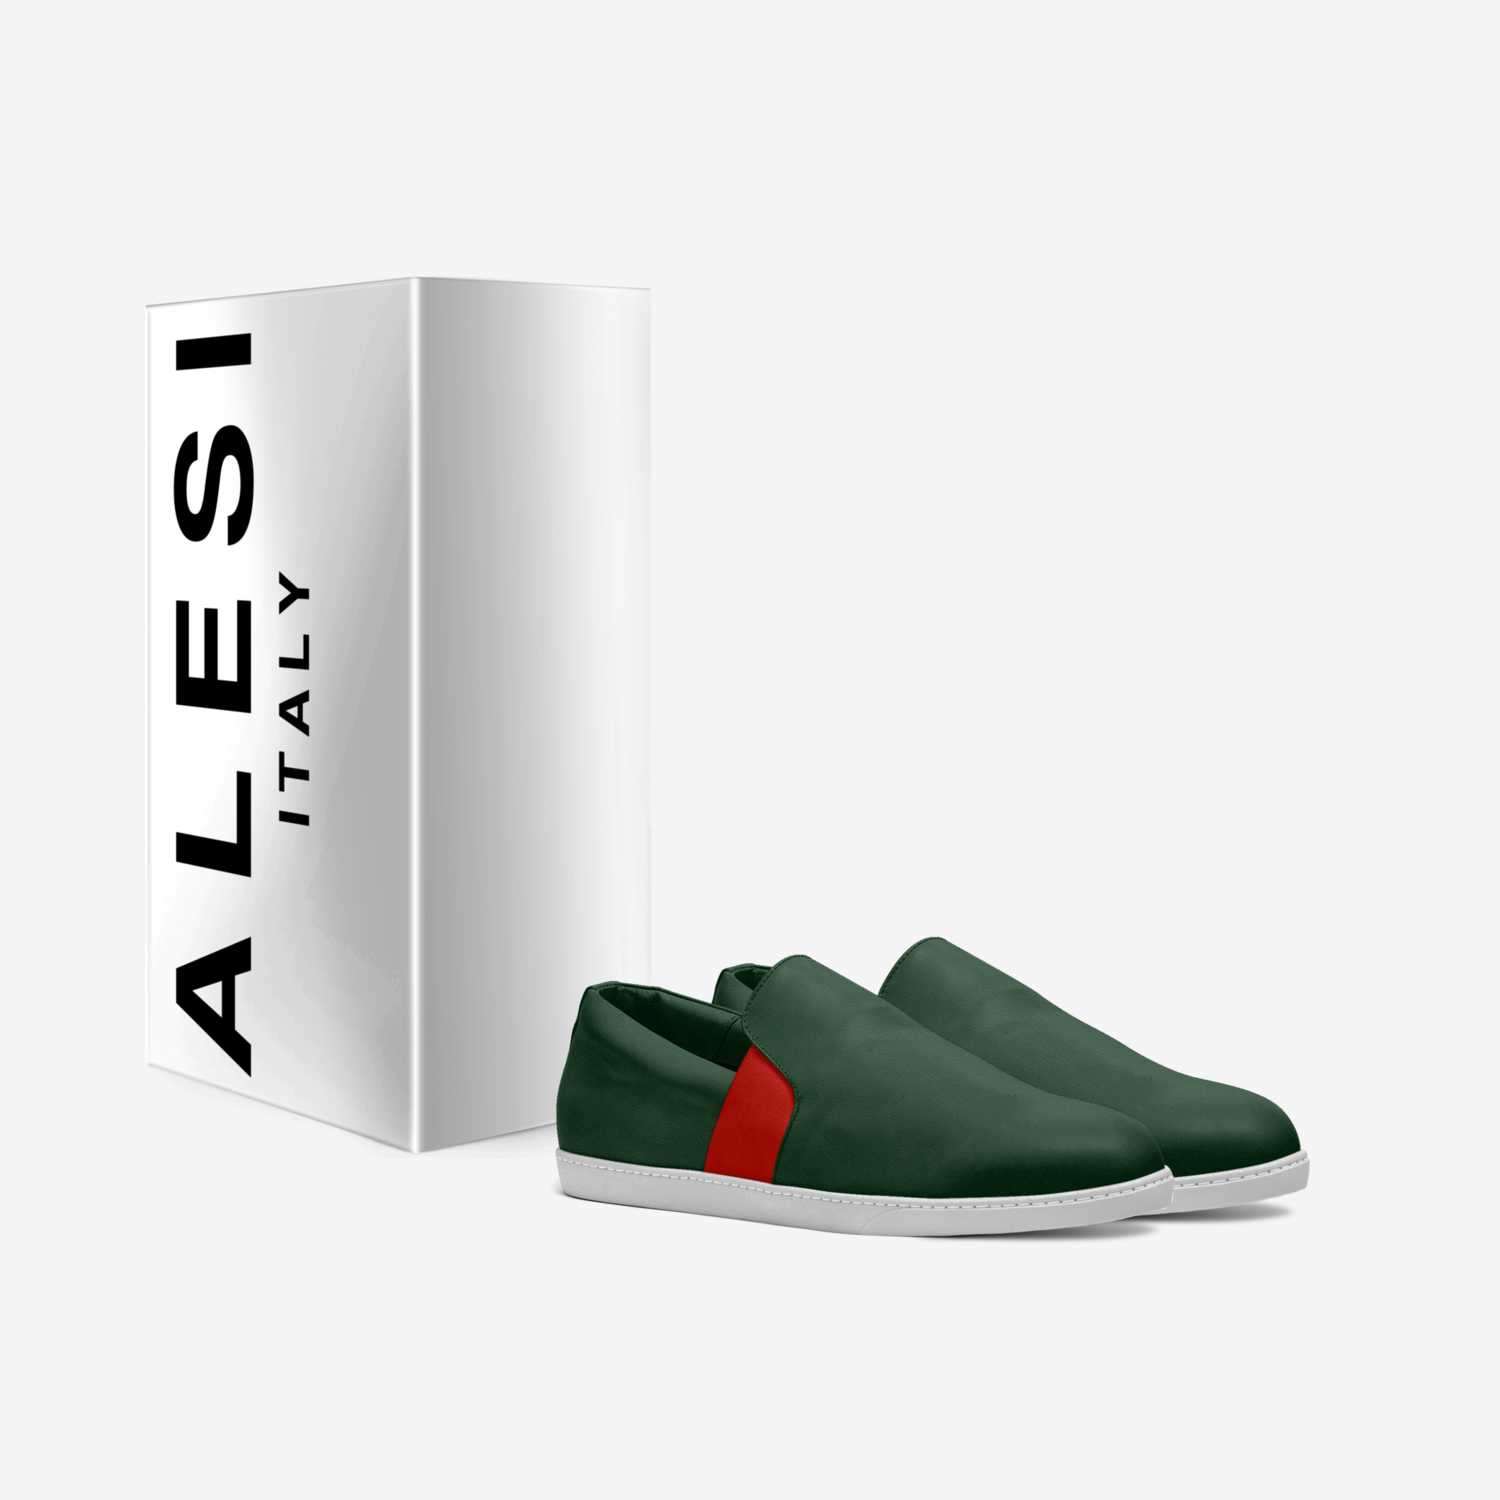 ALESI LUX SLIP custom made in Italy shoes by Lonanthony Parker | Box view